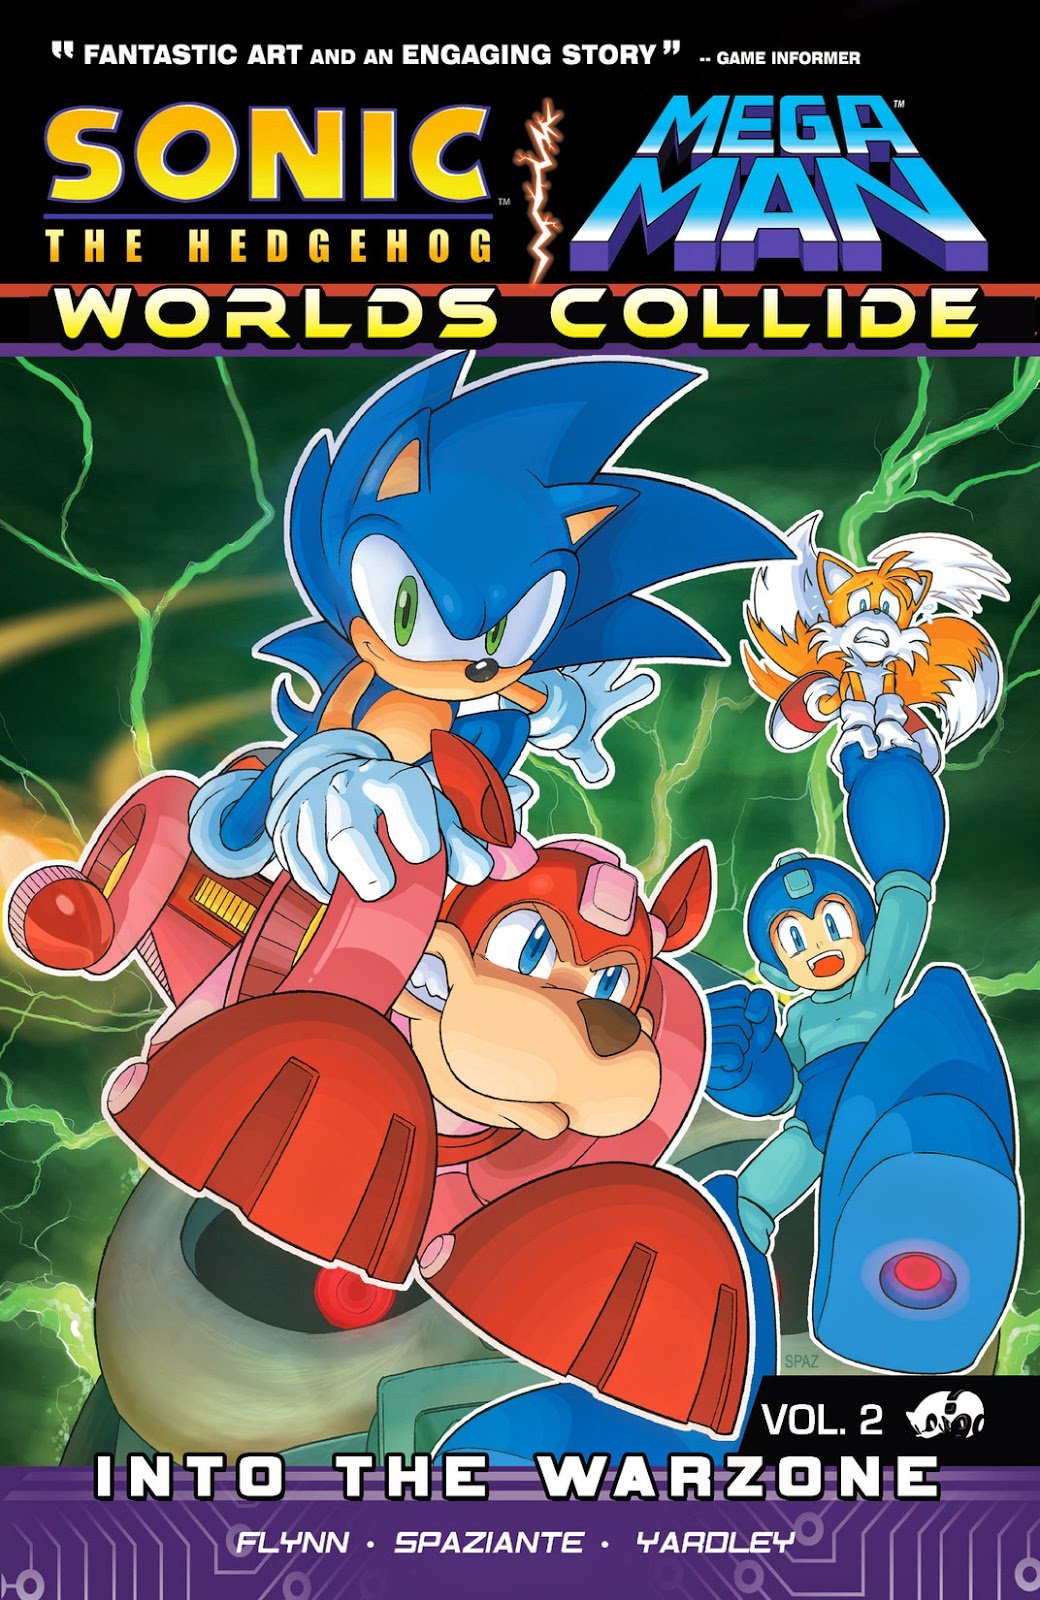 Sonic the Hedgehog / Mega Man: Worlds Collide Vol.2 - Into the Warzone